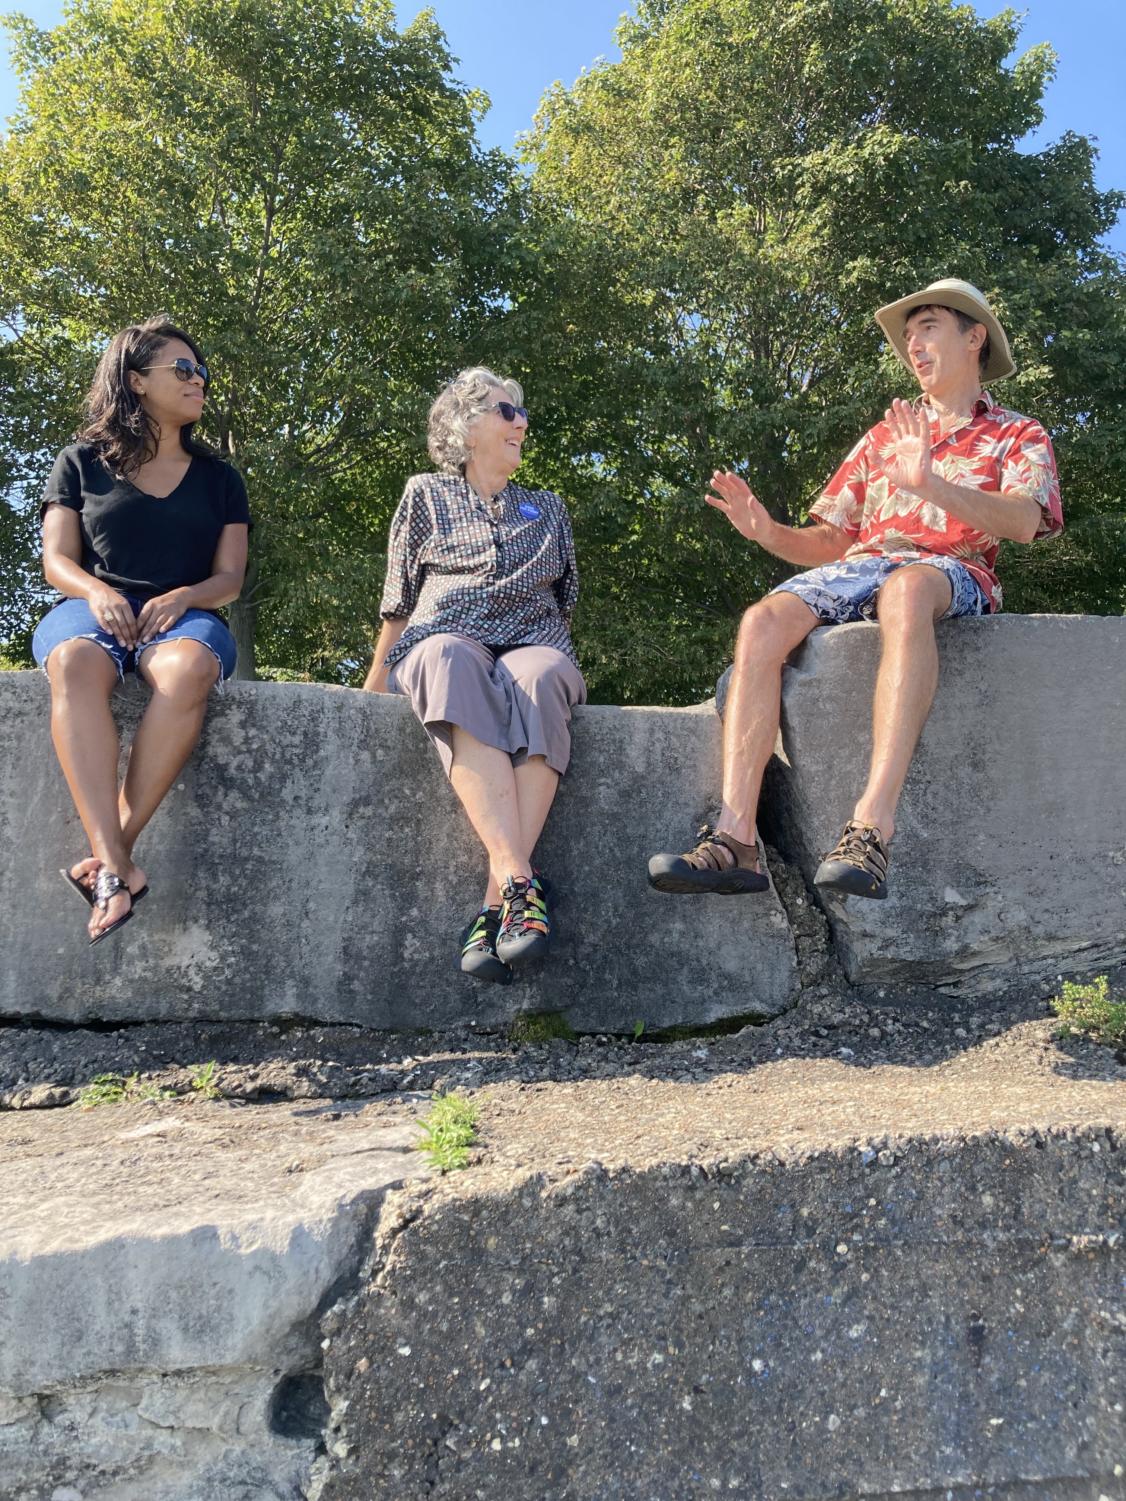 Members of the Promontory Point Conservancy. From left to right: Clineé Hedspeth, Debra Hammond, Michael Scott.